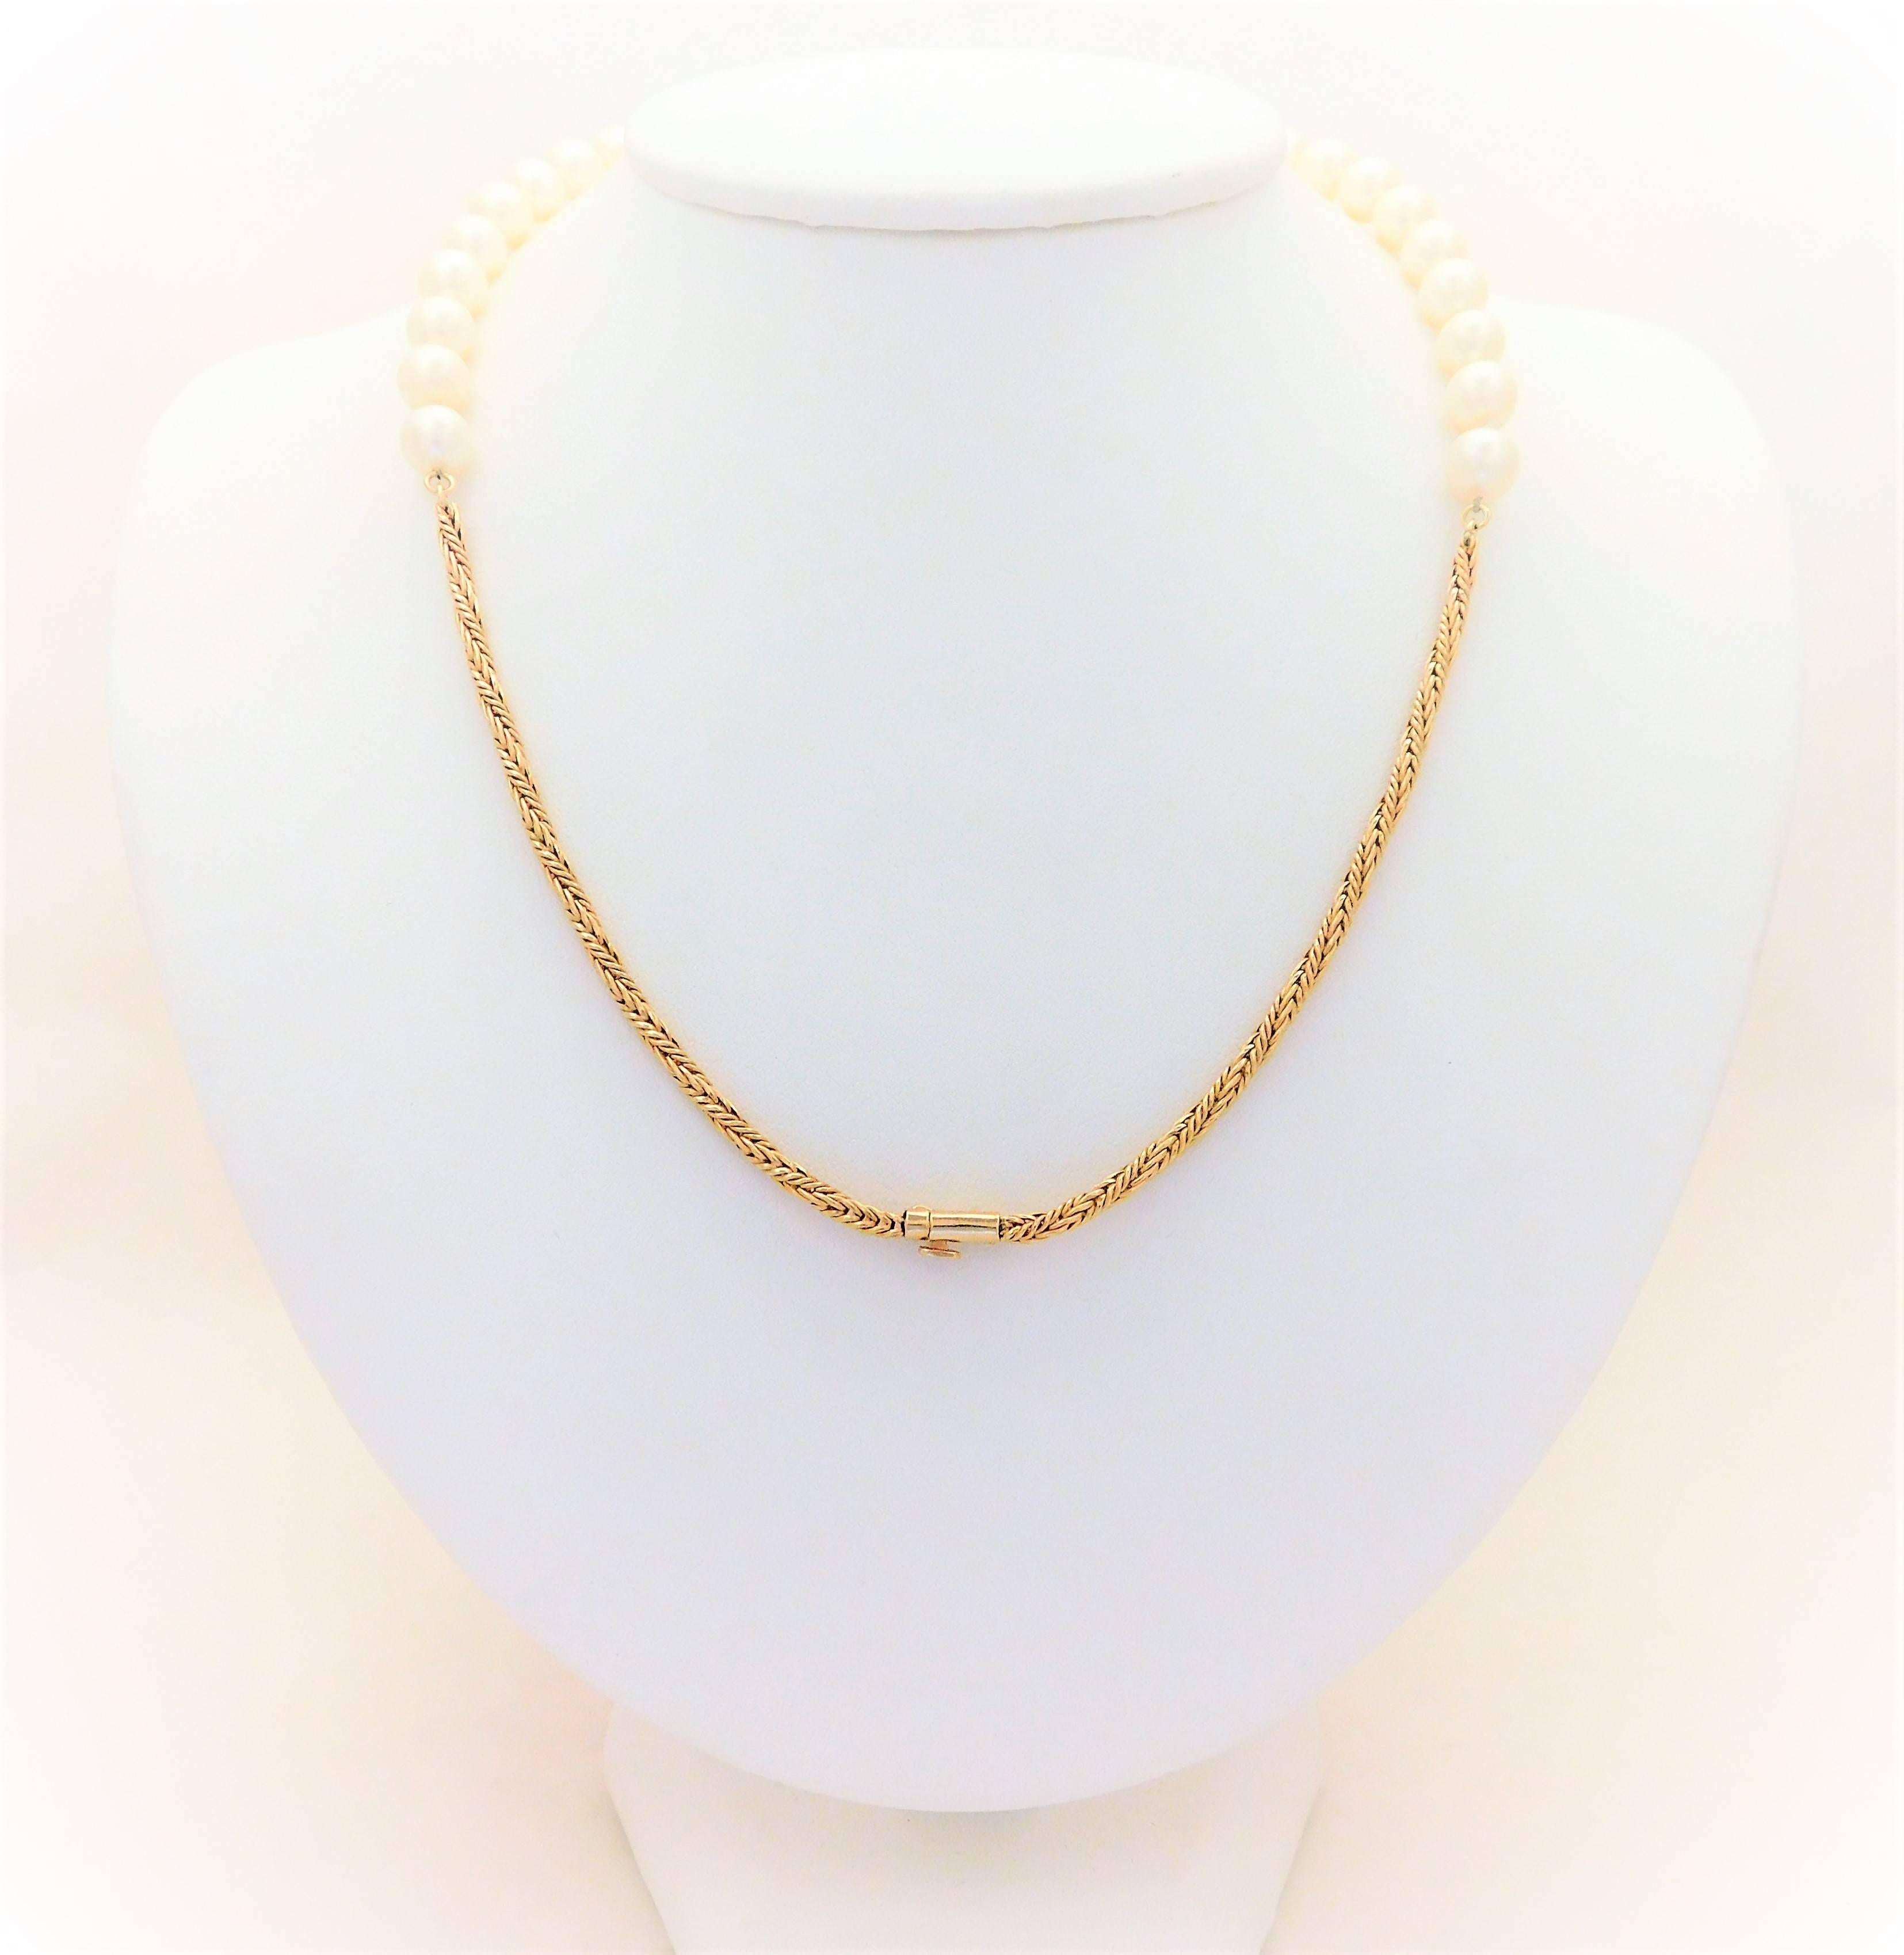 Midcentury White Pearl and 14 Karat Gold Necklace with Diamond Star Pendant 2